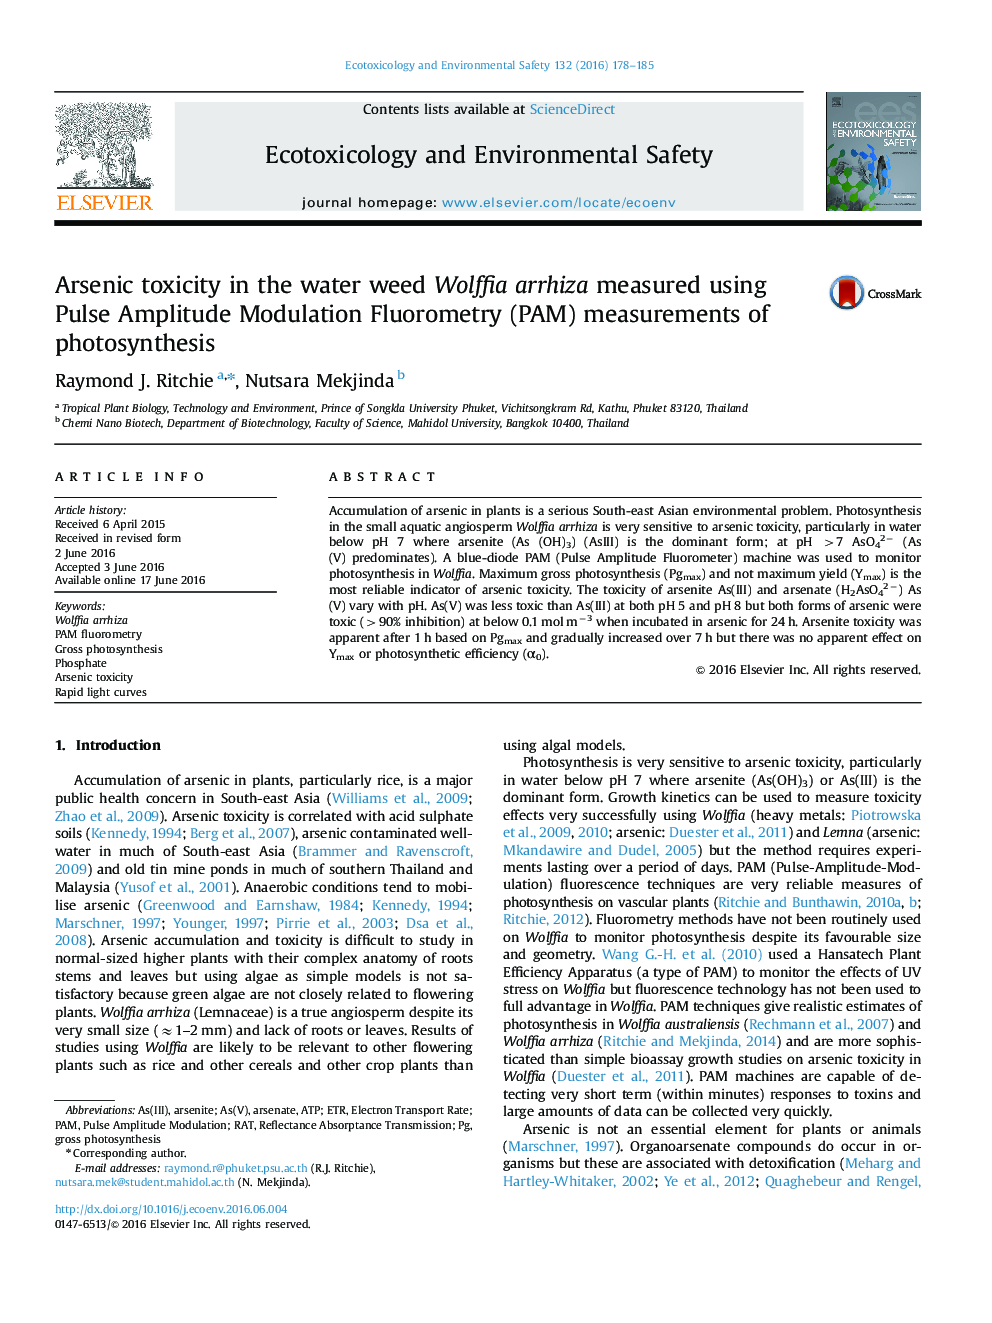 Arsenic toxicity in the water weed Wolffia arrhiza measured using Pulse Amplitude Modulation Fluorometry (PAM) measurements of photosynthesis